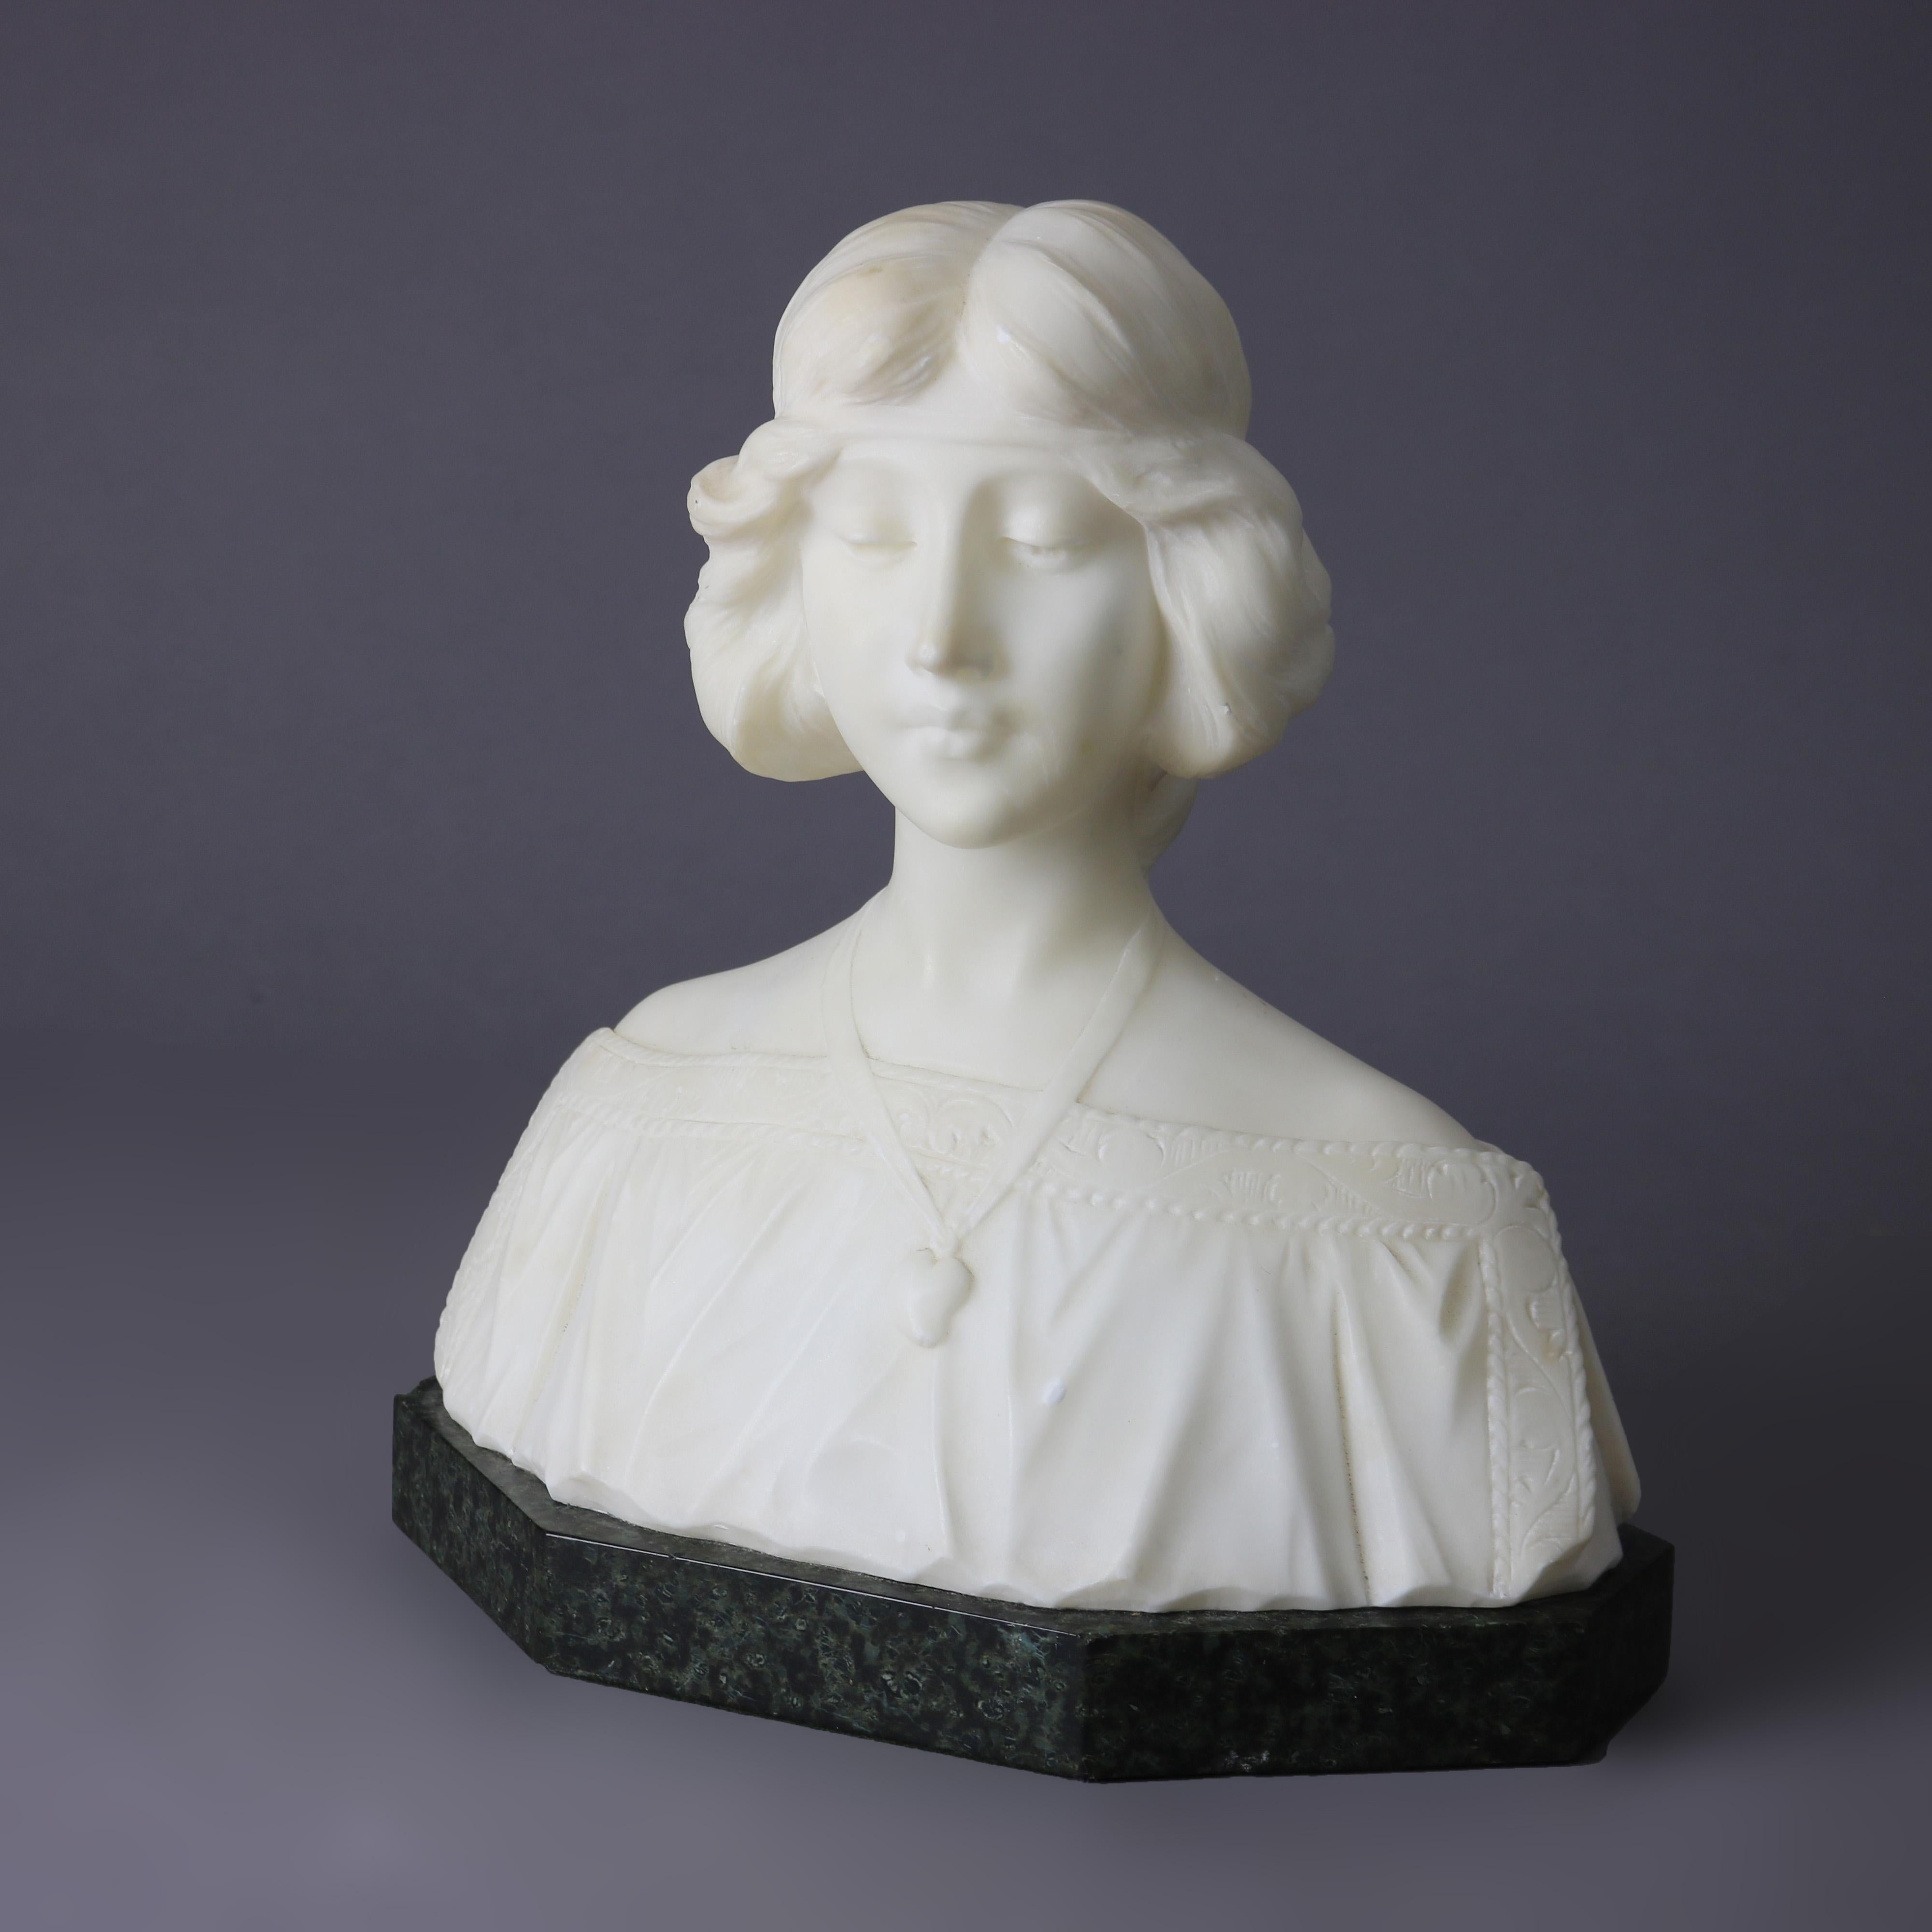 A carved alabaster sculpture depicts bust of a woman, seated on black marble base, circa 1890.

Measures - 11.75H x 10.75